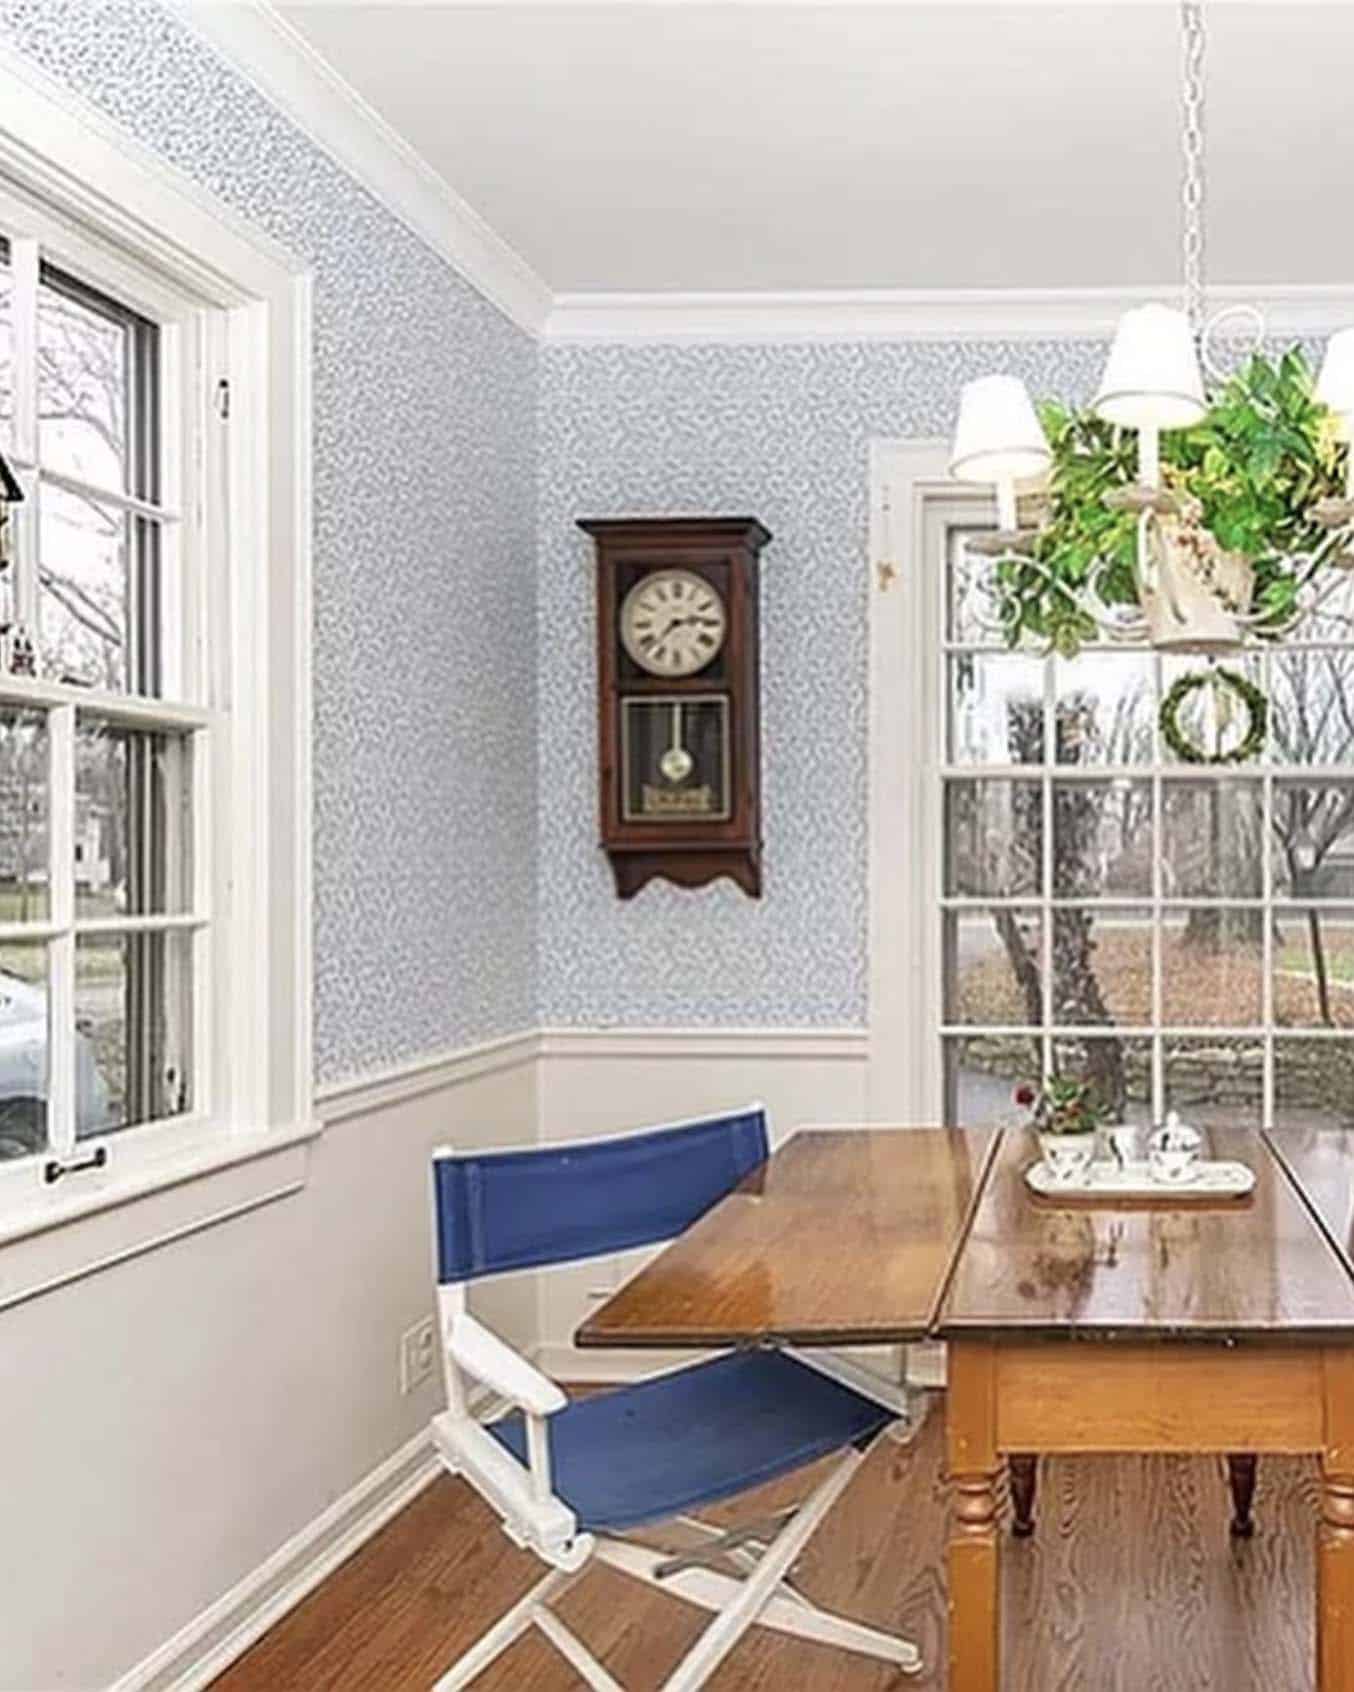 1930s breakfast nook before the renovation